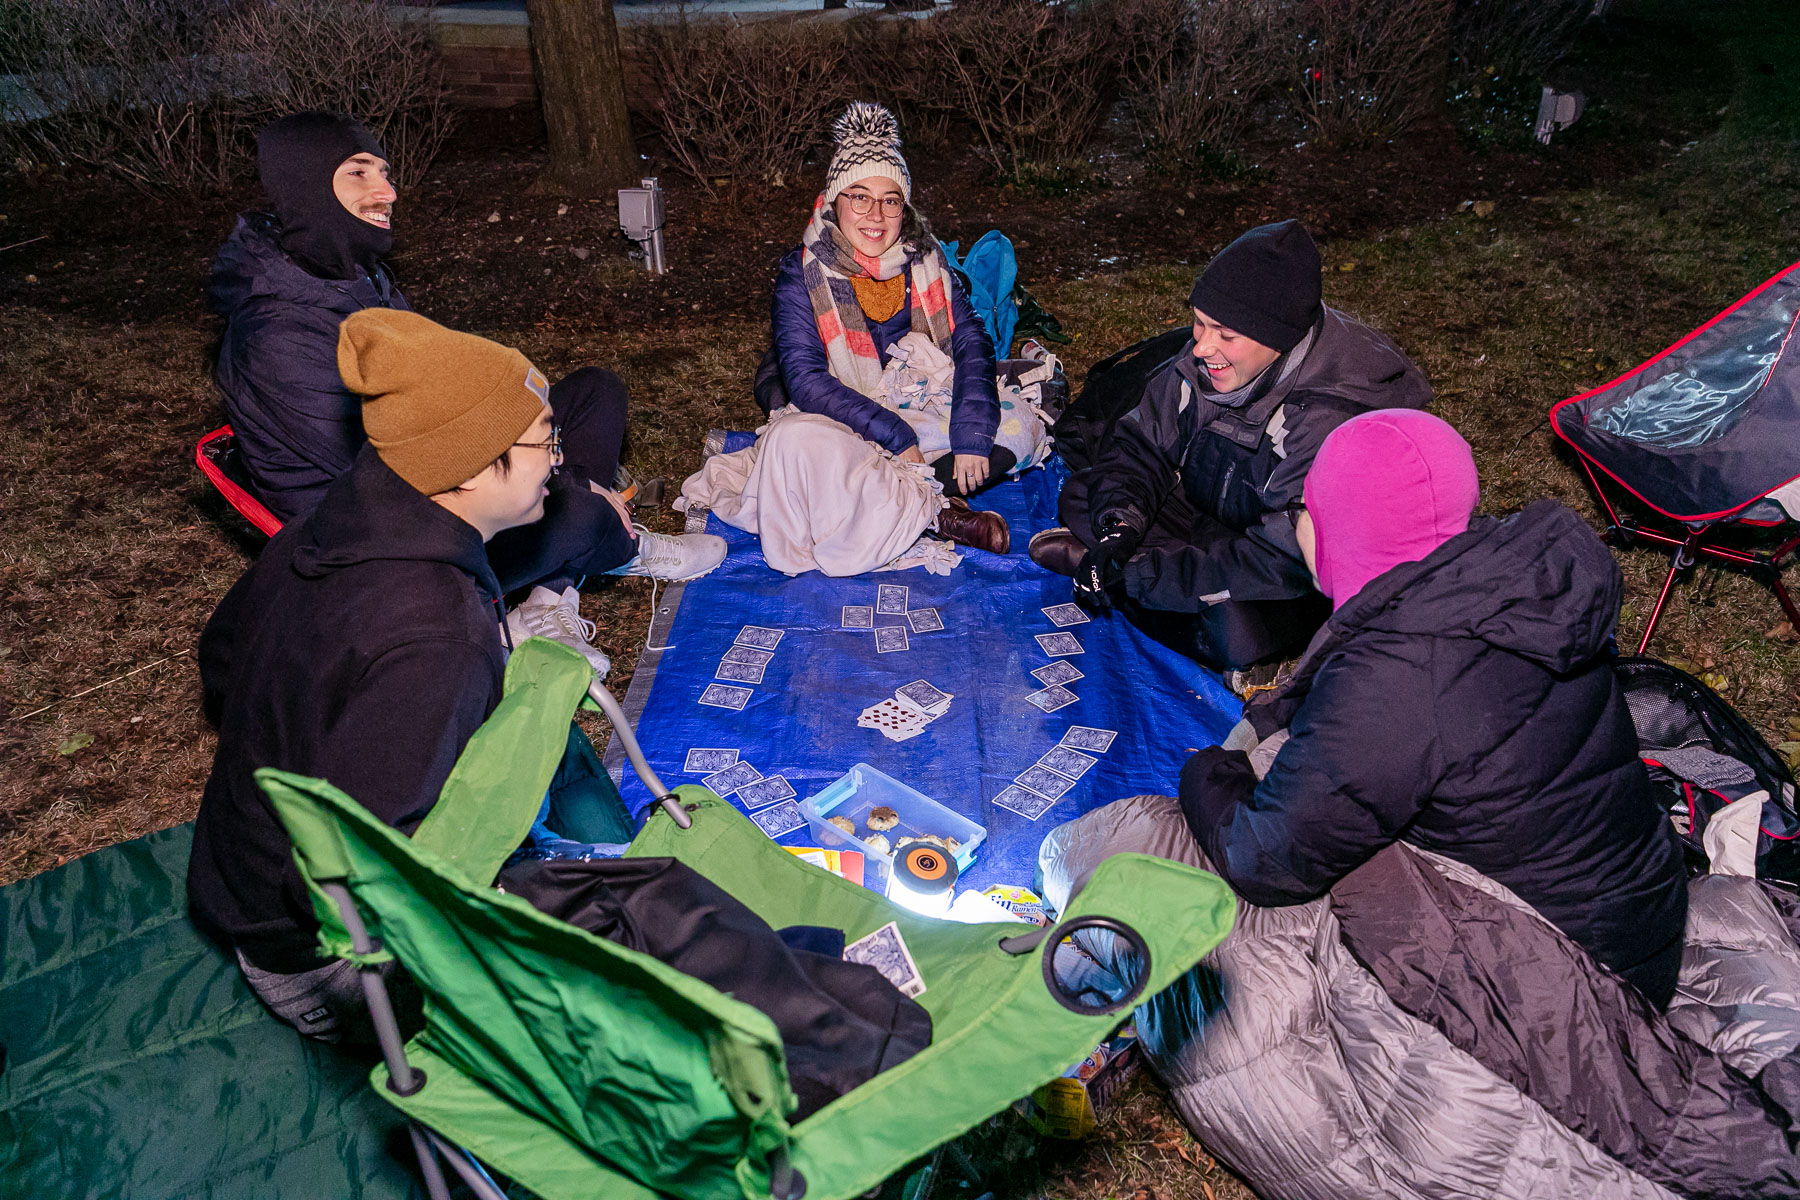 Sleepers kept their spirits up in the cold weather by bringing snacks and games. (DePaul University/Randall Spriggs)